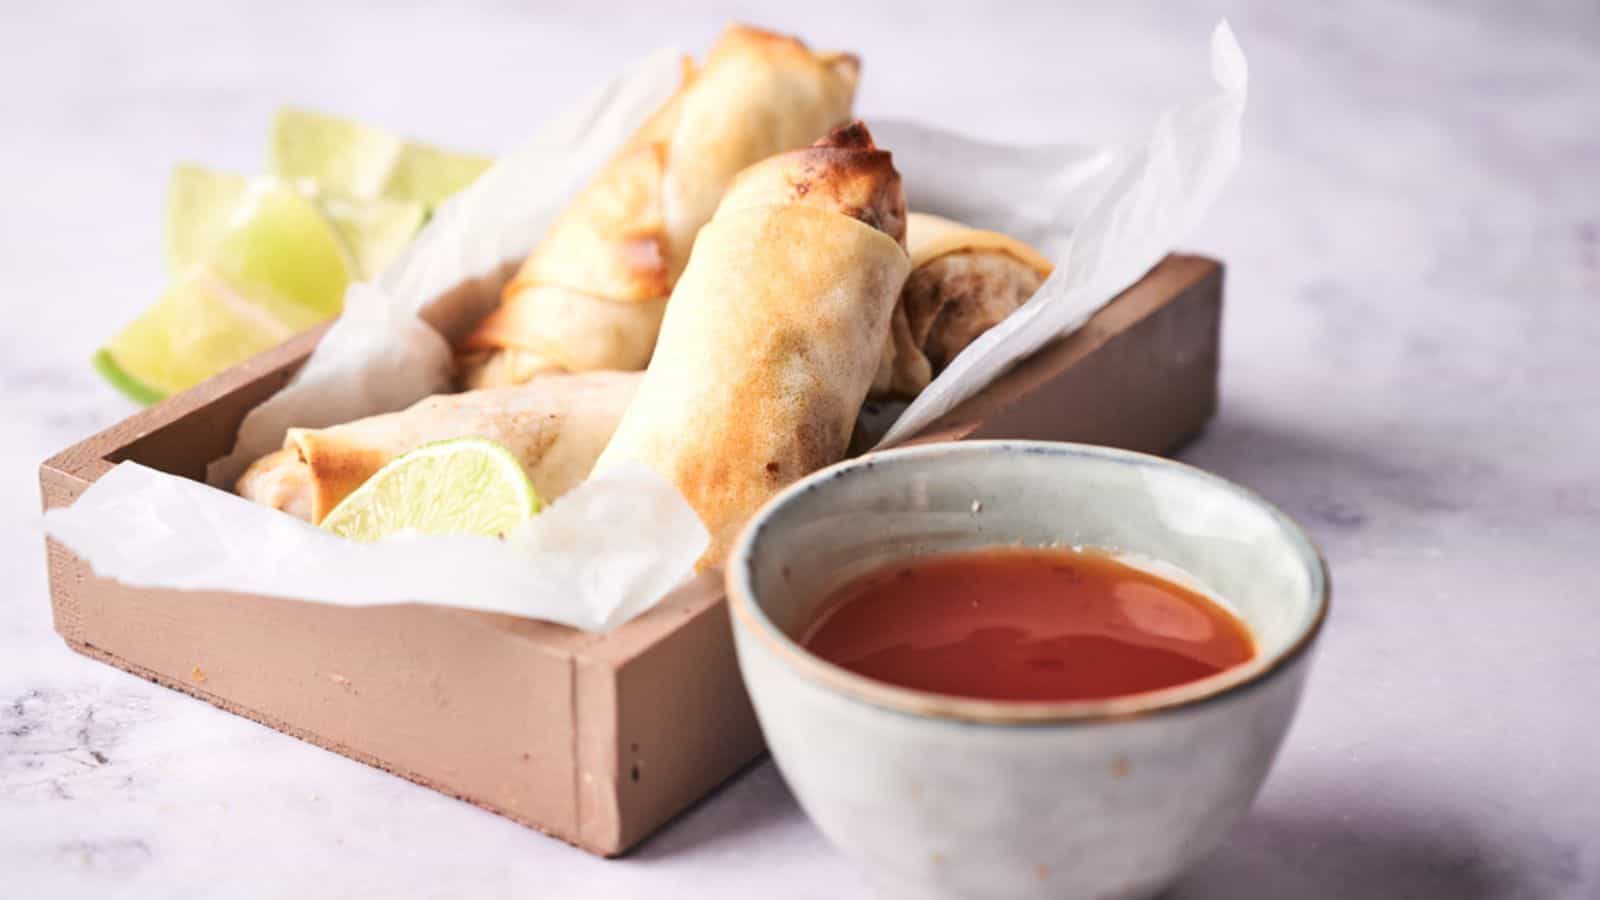 <p>Who knew Egg Rolls could be this good without any egg or meat? Wrapped up in these crispy shells are a mix of veggies and flavors that’ll have everyone reaching for more. It’s a starter that’ll make you forget it’s vegan, perfect for gatherings where you want to impress without much fuss.<br><strong>Get the Recipe: </strong><a href="https://twocityvegans.com/vegan-egg-rolls-recipe/?utm_source=msn&utm_medium=page&utm_campaign=msn">Egg Rolls</a></p>